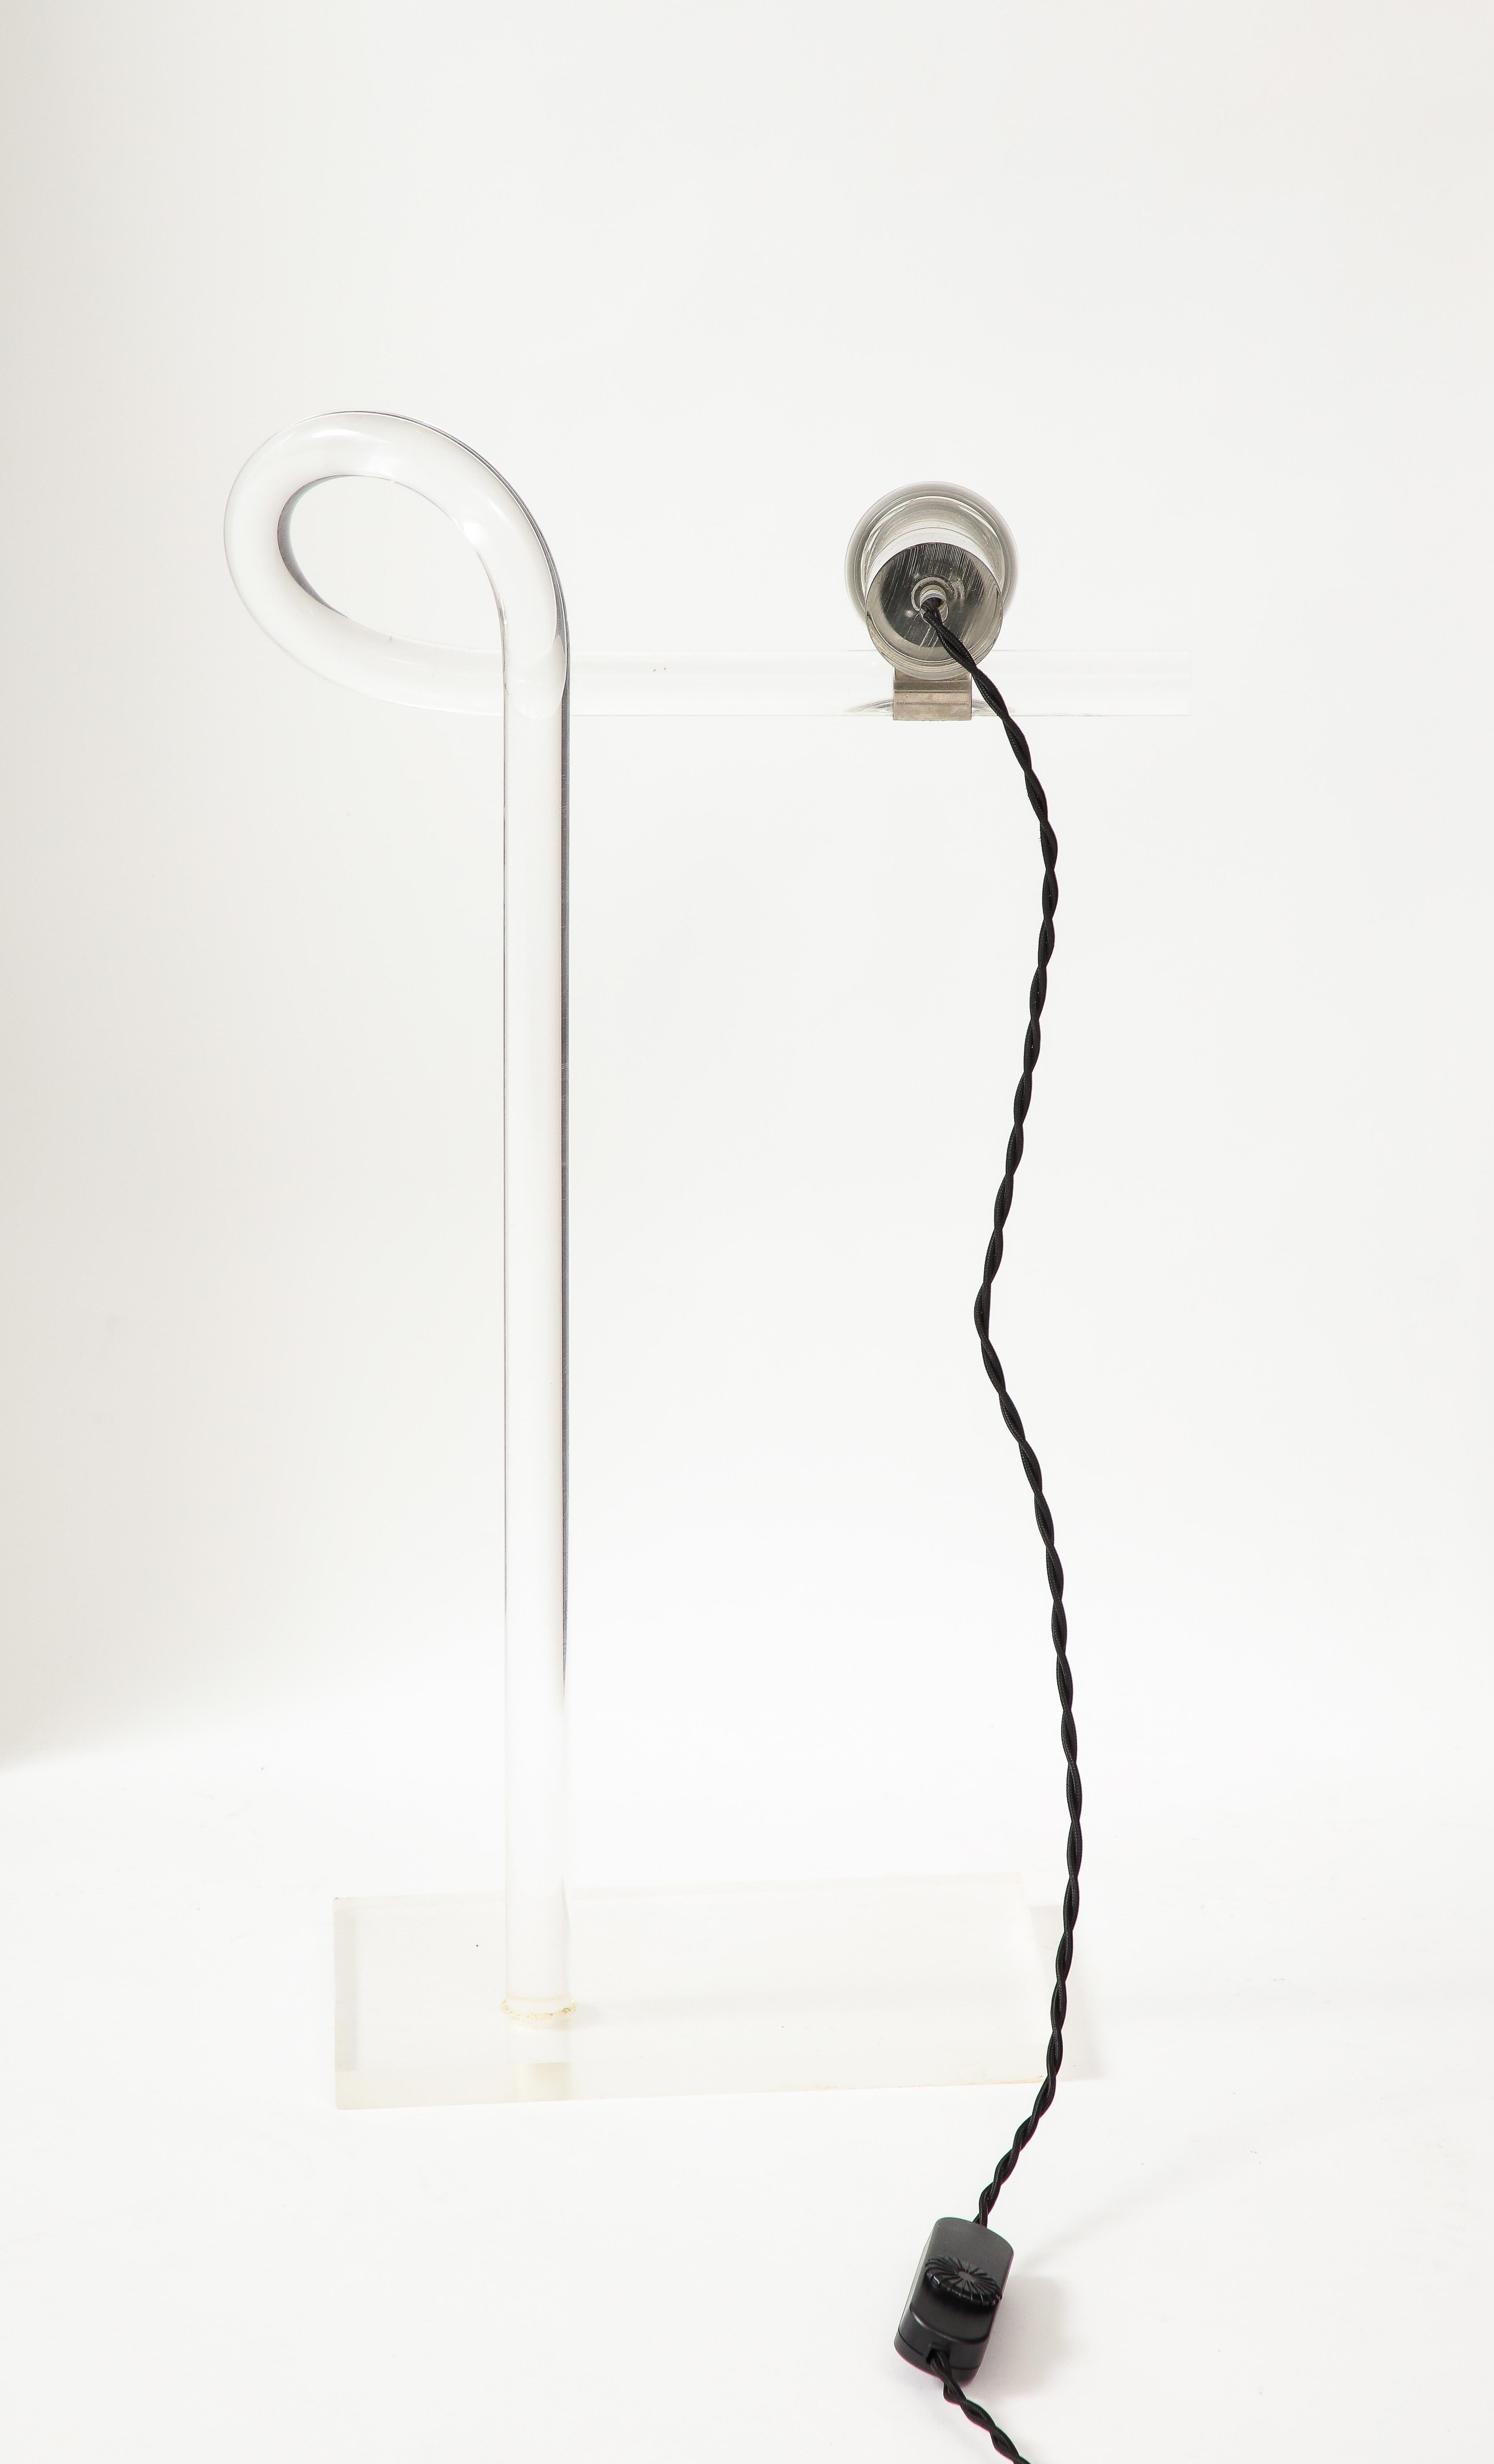 Rare Minimalist table or desk lamp by Peter Hamburger for Knoll USA- 1970s
Surface scratches underneath base. Else in good vintage condition. This lamp has been rewired for use in the US.
Dimensions as follow : 
Base
Width: 7 1/8